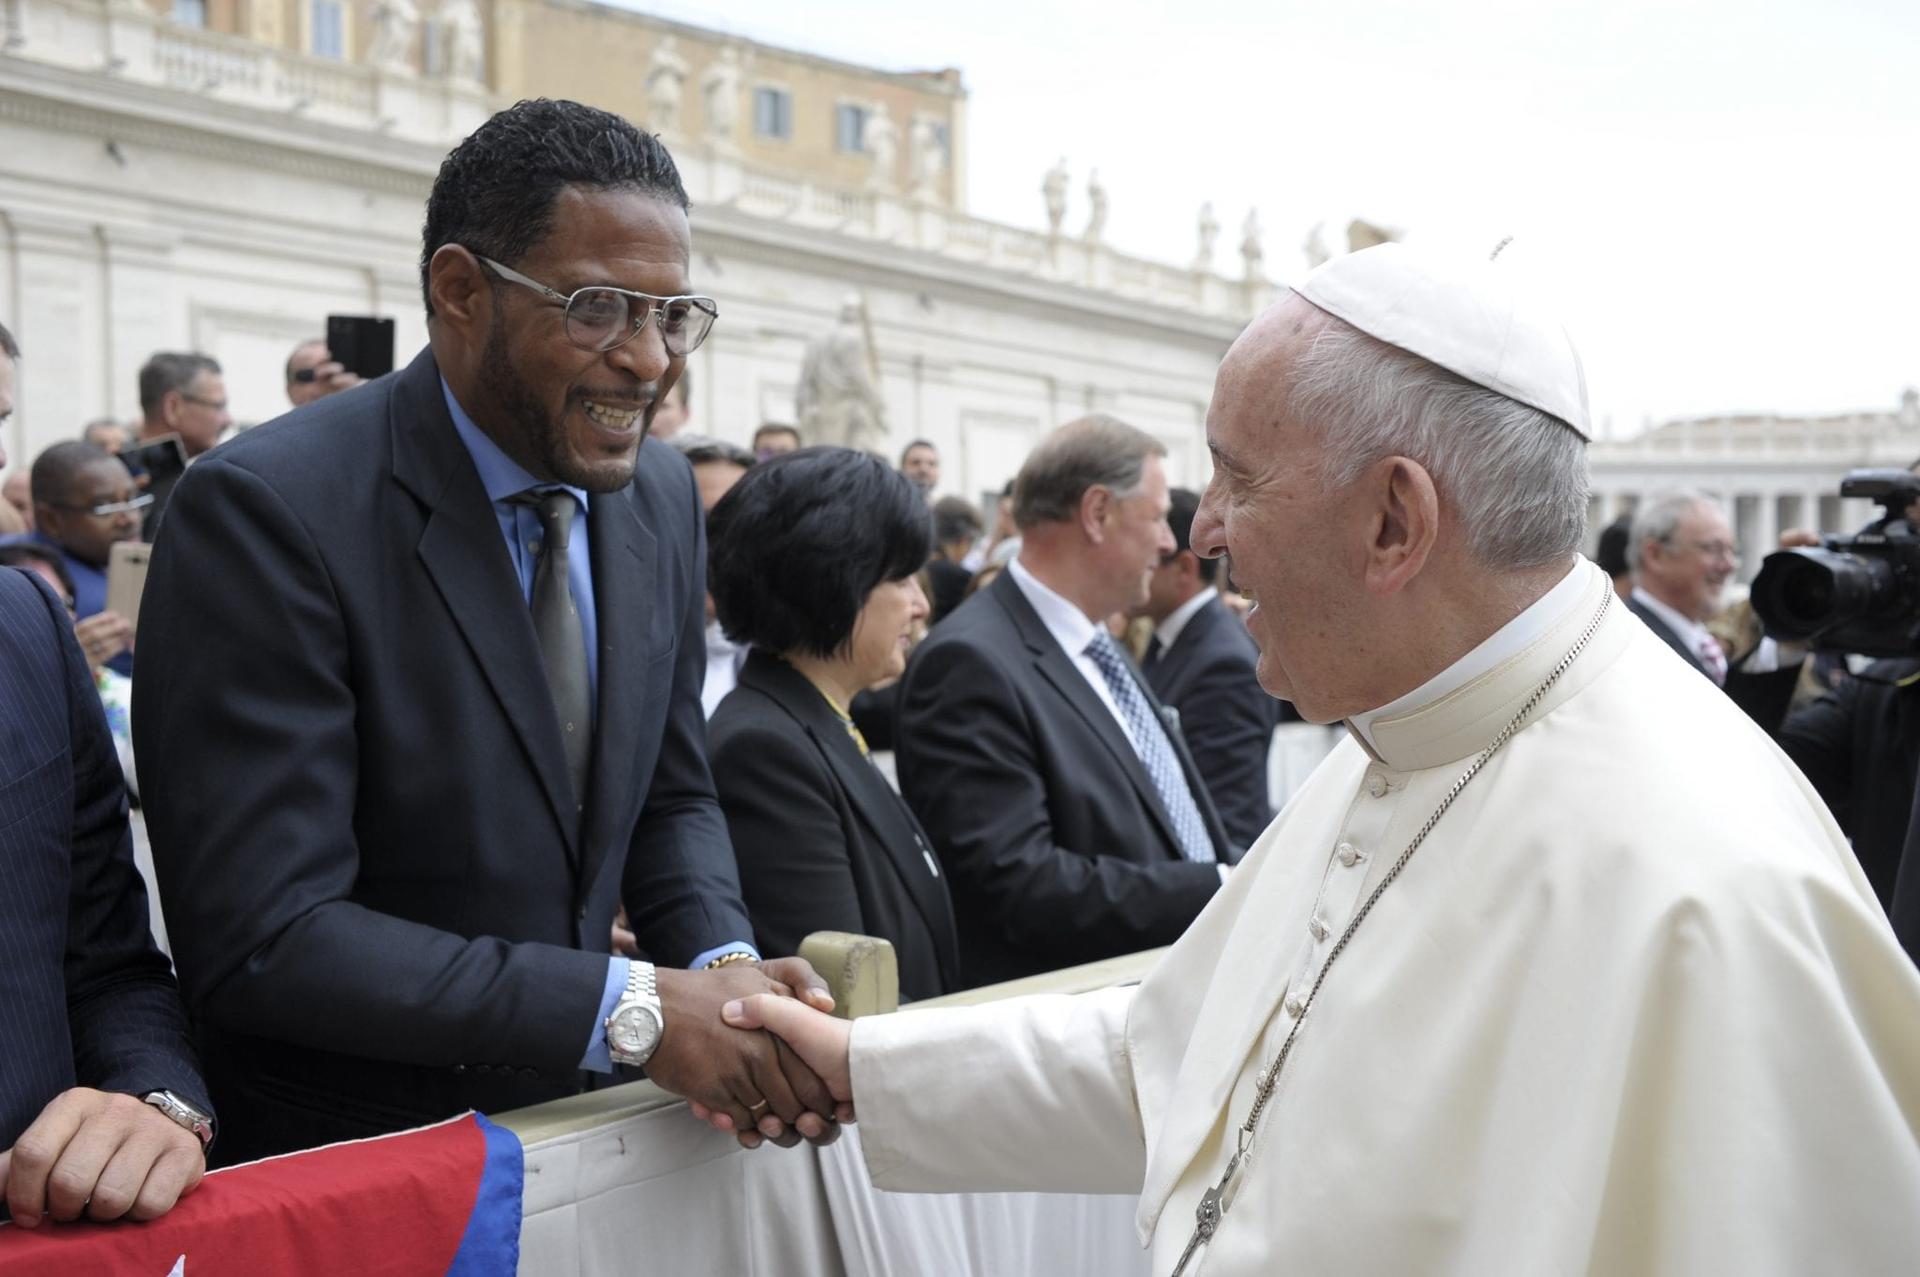 World’s best high jumper has low-profile meeting with pope